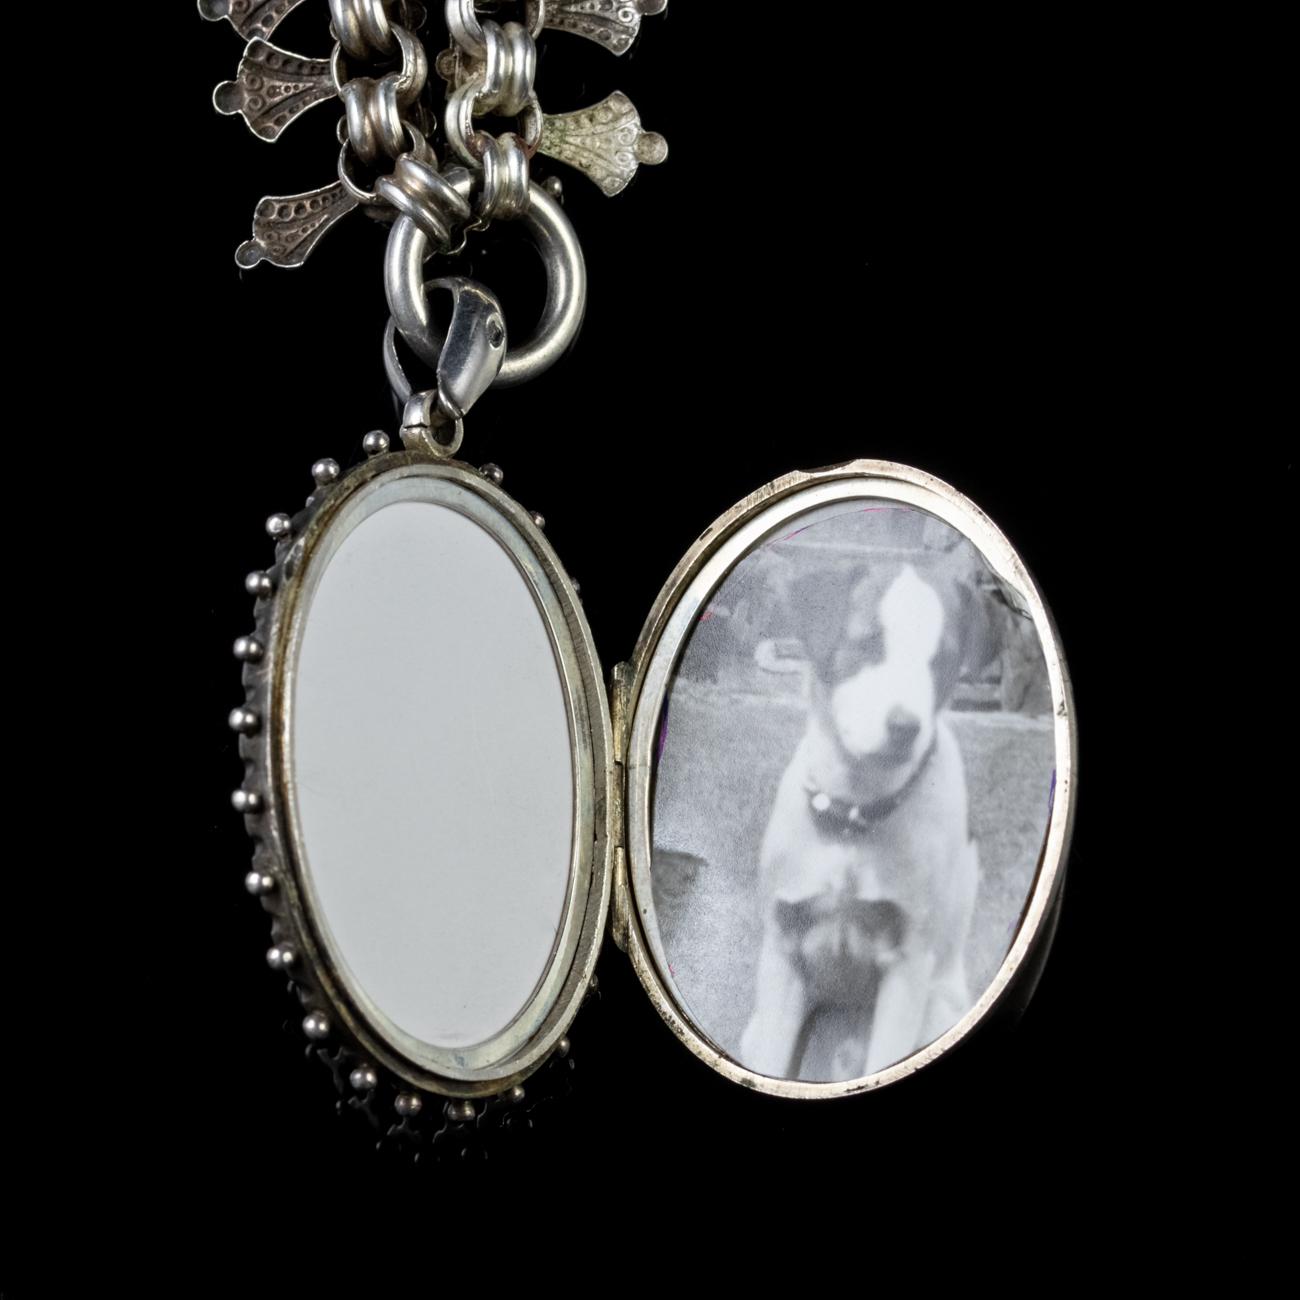 Antique Victorian Forget Me Not Collar Locket 18 Carat Gold Silver Dated 1881 For Sale 5